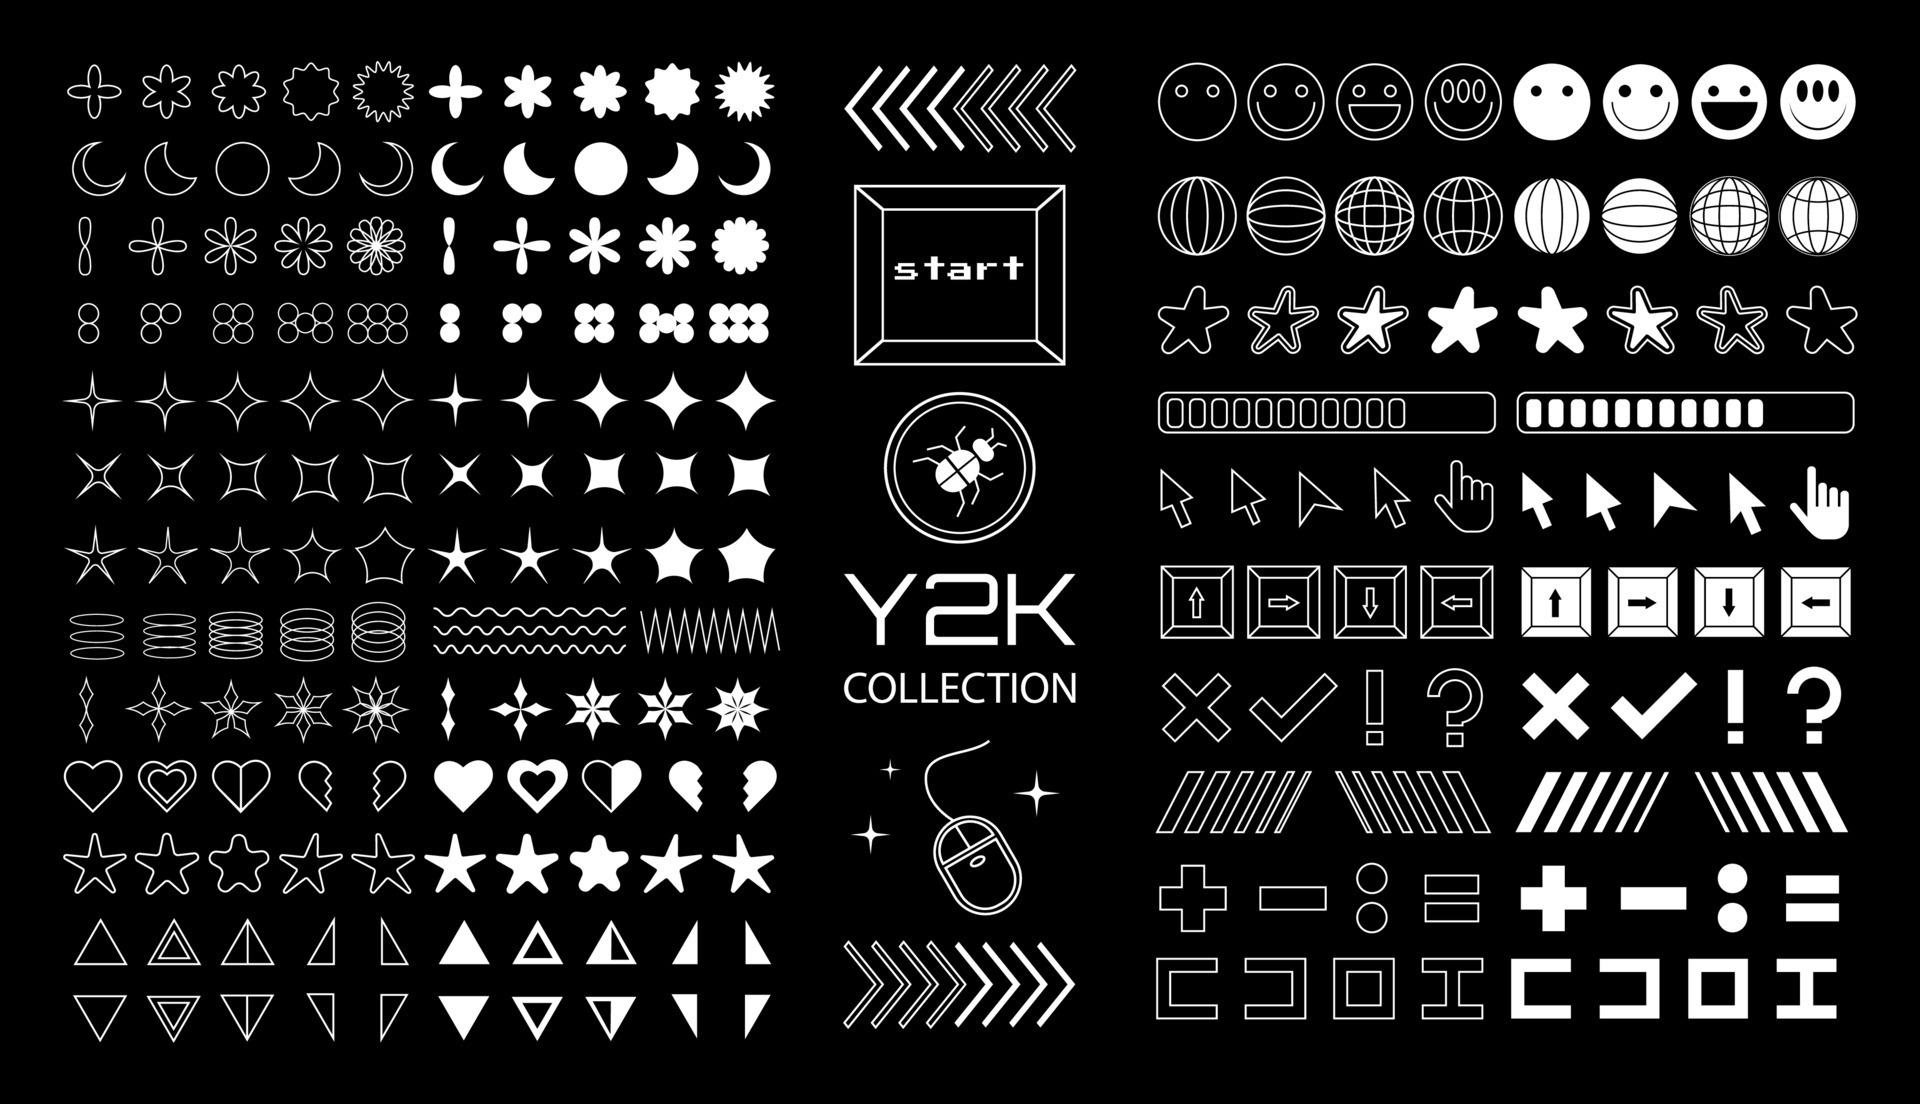 Big Collection Symbol and Objects in Y2k Graphic by Gantan Guntara